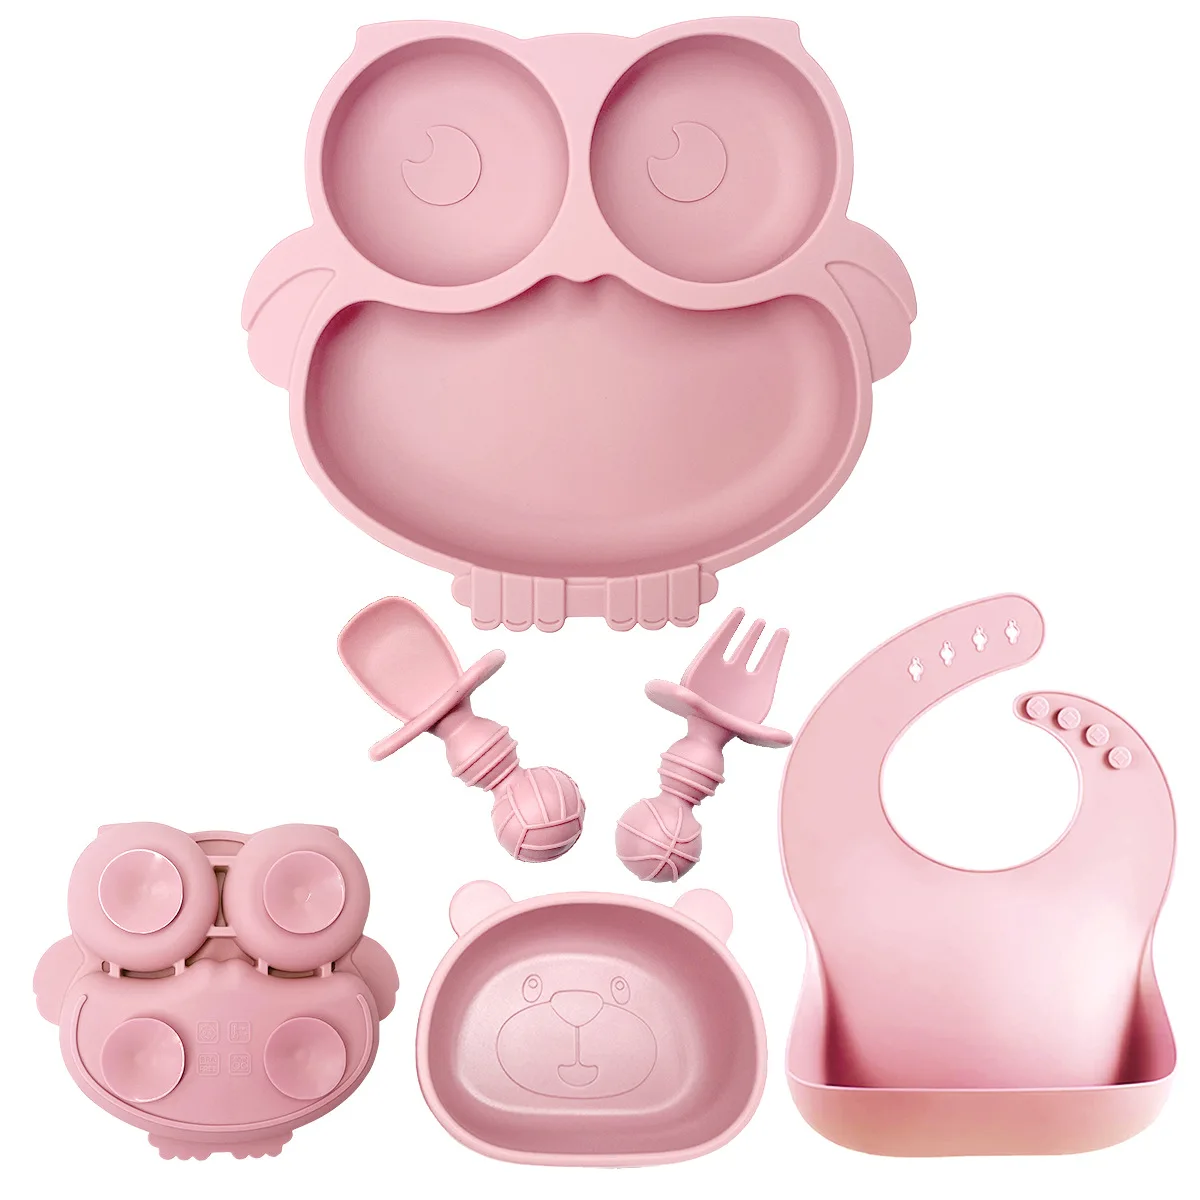 Owl Style 5 PCS Baby Soft Silicone Feeding Set Sucker Bowl Silicone Dishes Plate For Baby Cup Bibs Spoon Fork Tableware enlarge